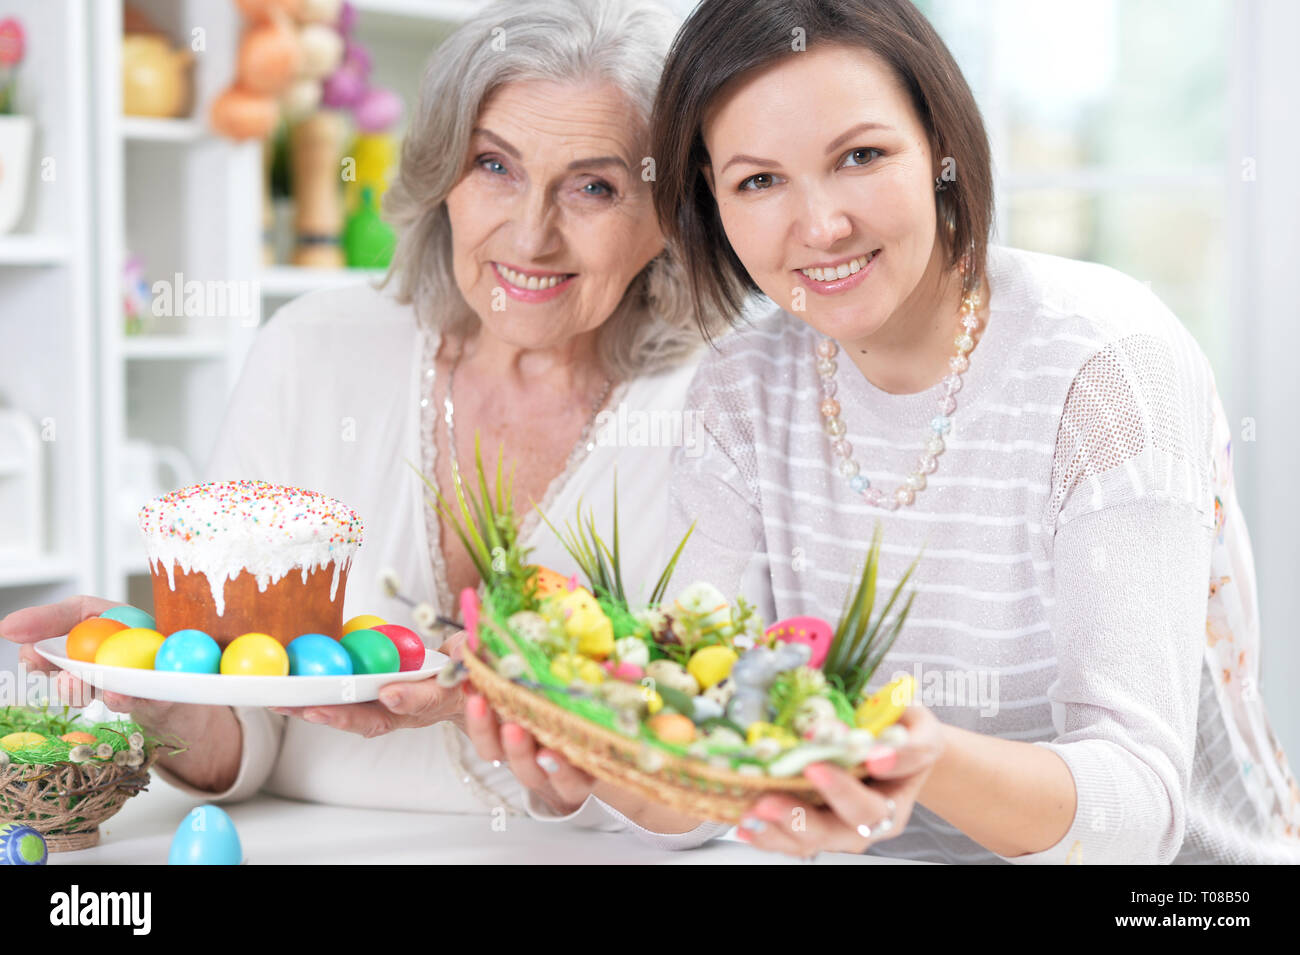 Close-up portrait of mother and daughter colouring eggs Stock Photo